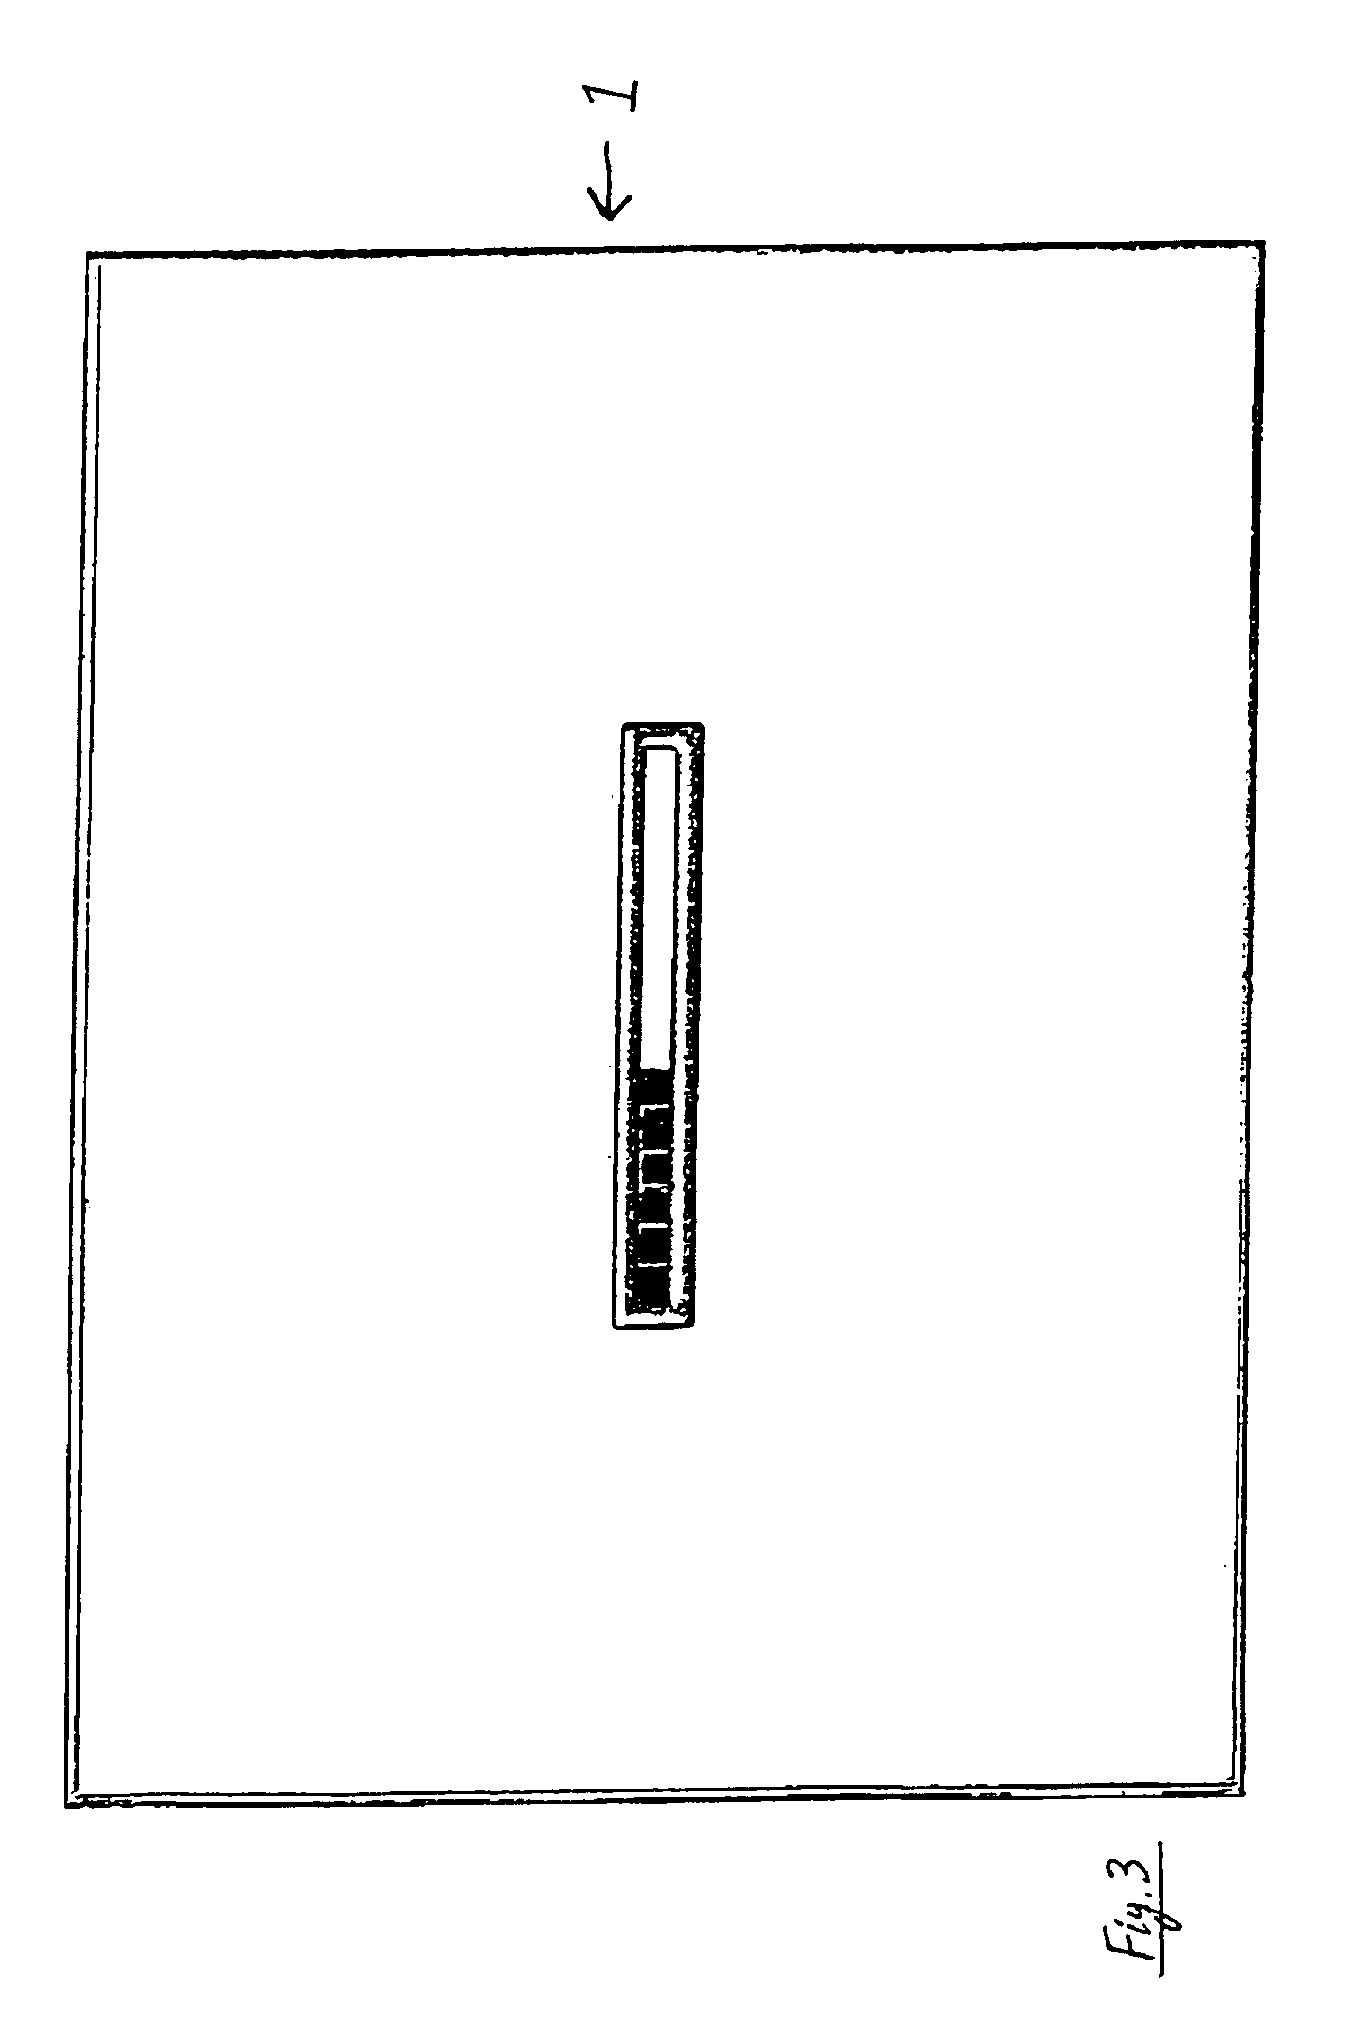 Touch sensitive input and display arrangement for controlling and monitoring aircraft cabin systems